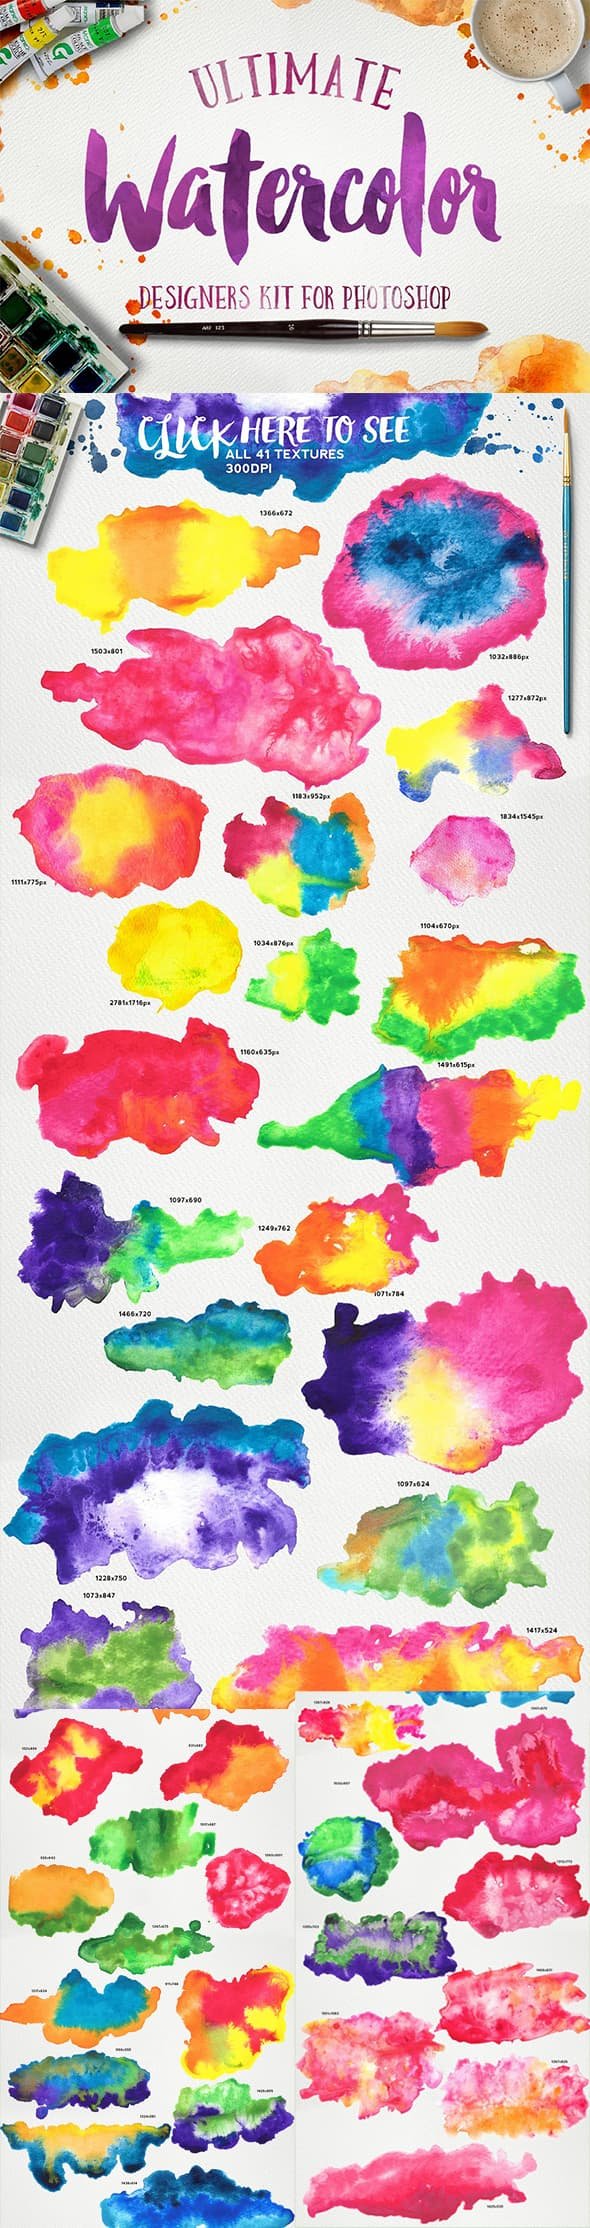 CreativeMarket - Watercolor KIT for Photoshop - 223071